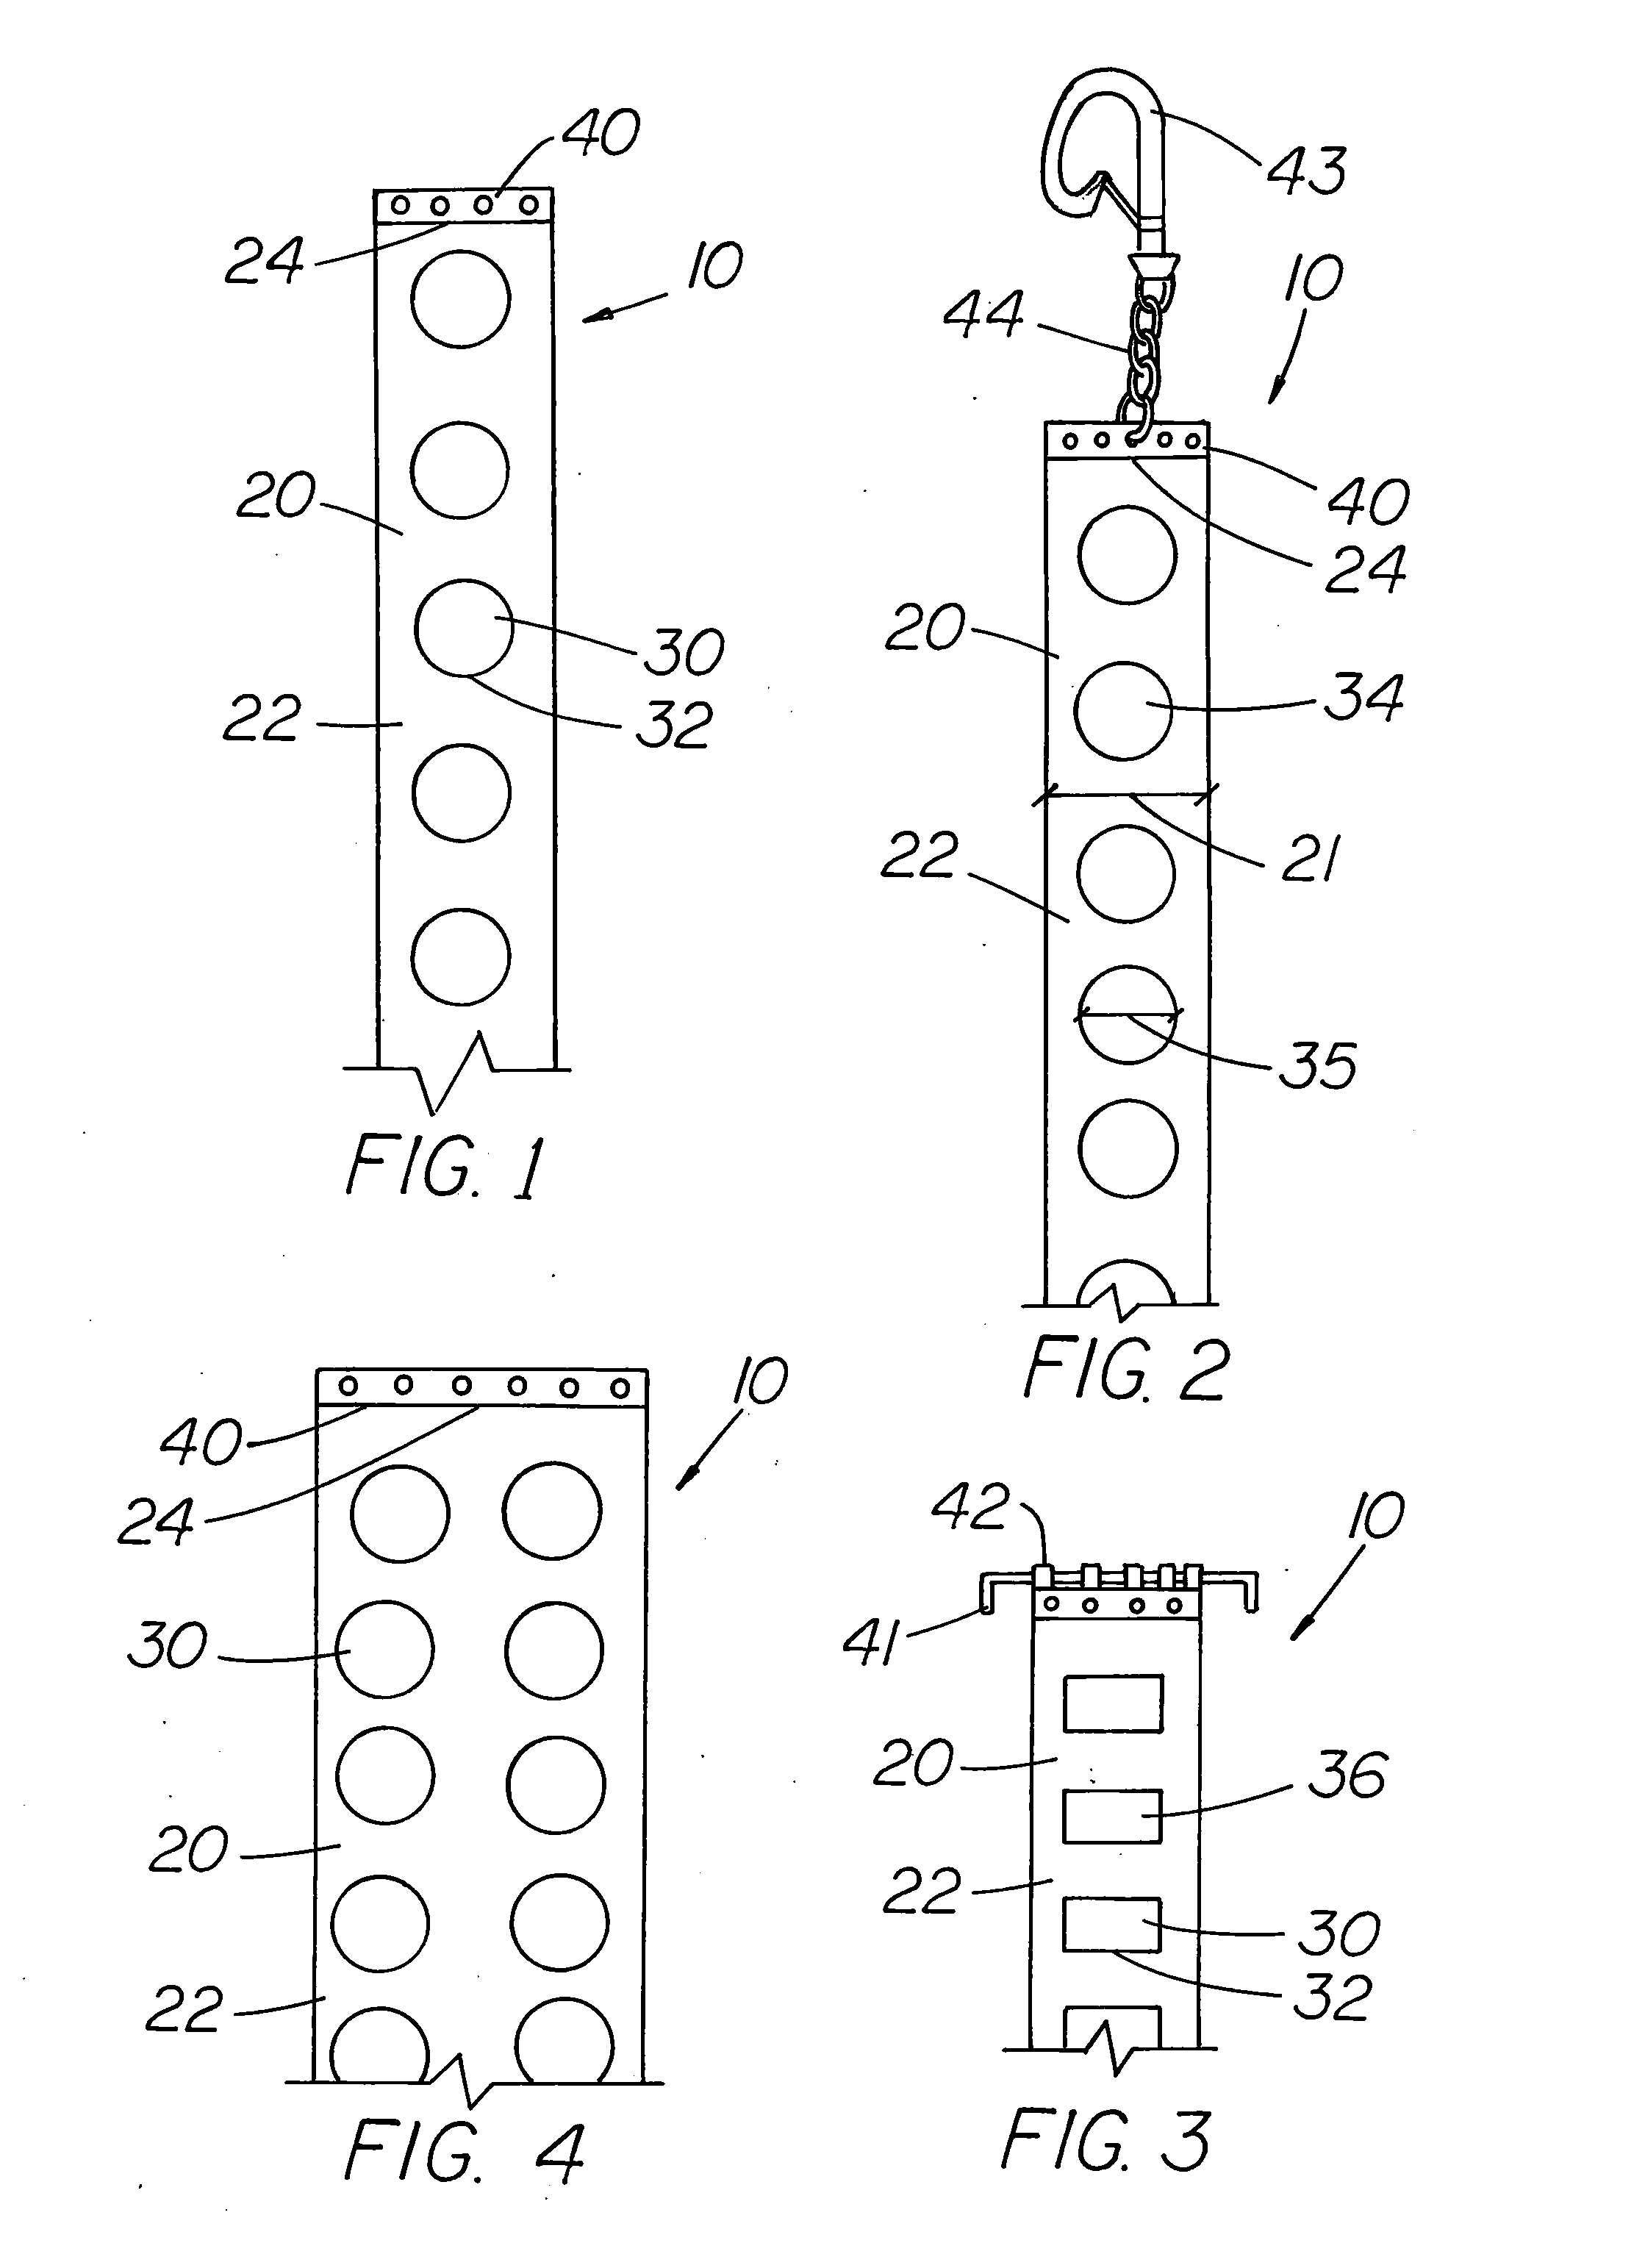 Method for Recycling Conveyor Belts